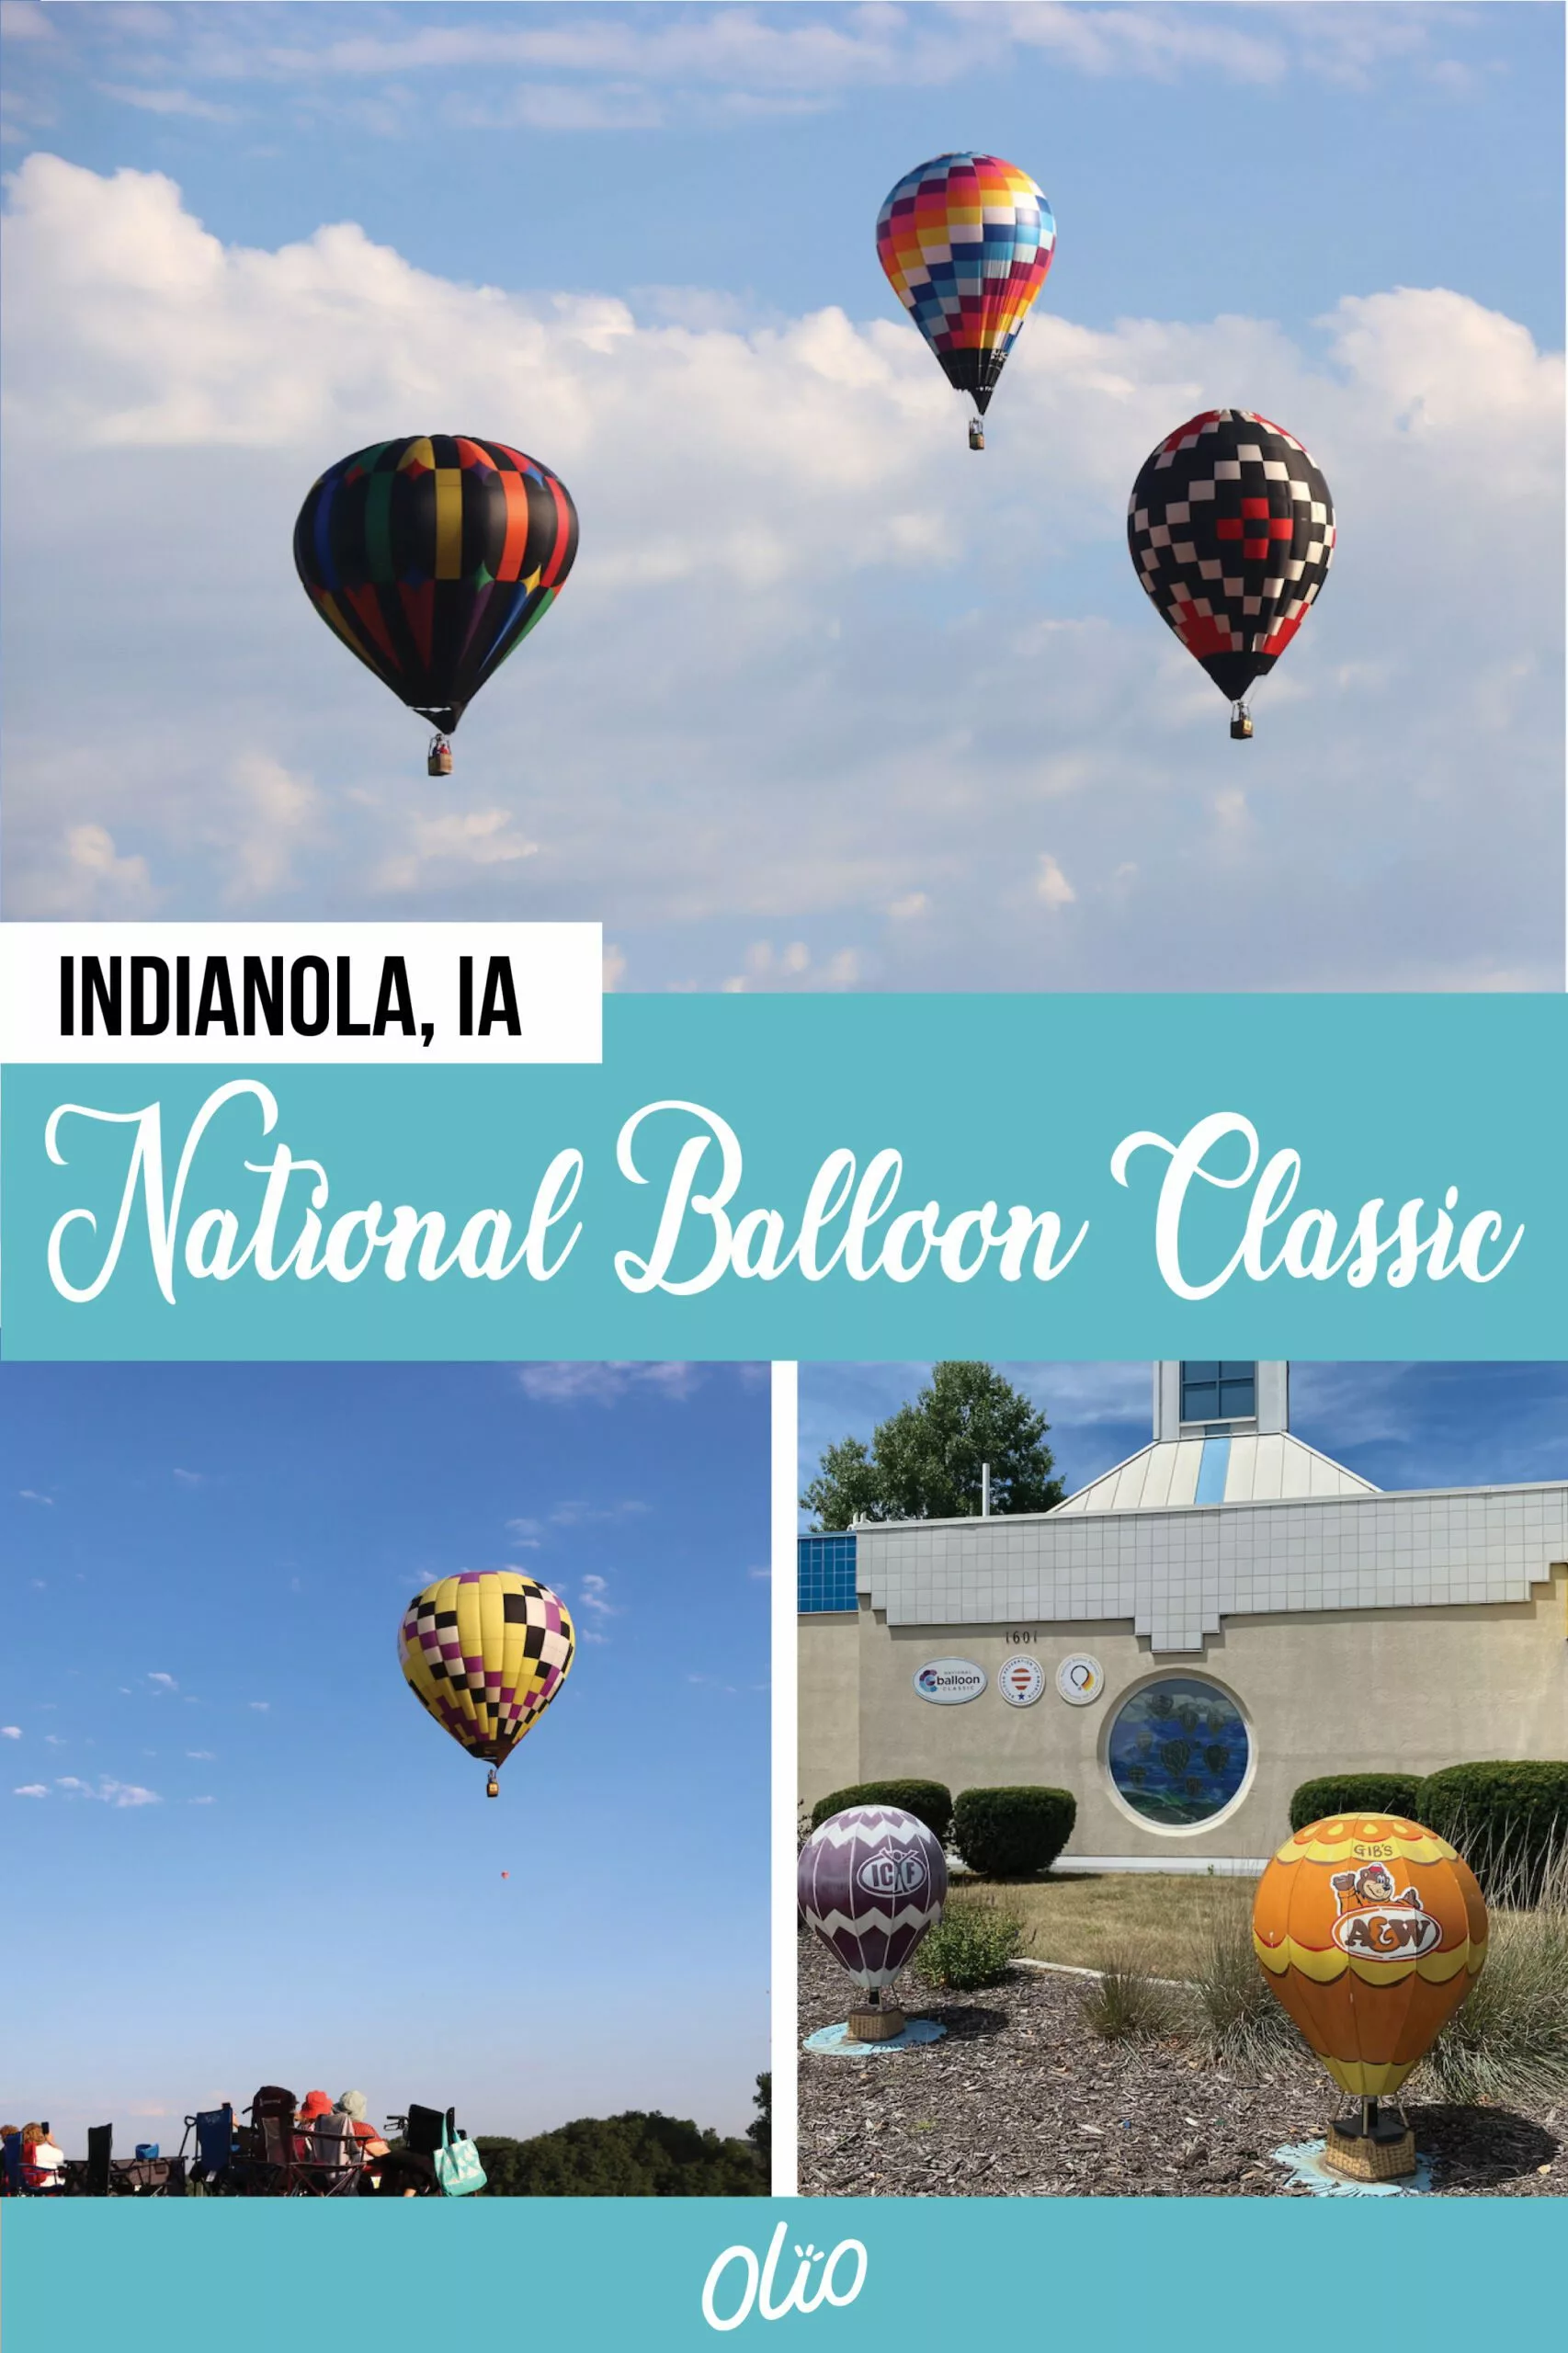 #Ad Let your sense of adventure take flight at the annual National Balloon Classic in Indianola, Iowa! More than 100 balloons fill the sky over the course of this nine-day event that’s sure to captivate travelers and balloonists alike. Learn everything you need to know about the festival, plan a visit to the National Balloon Museum and more. #ThisIsIowa @IowaTourism